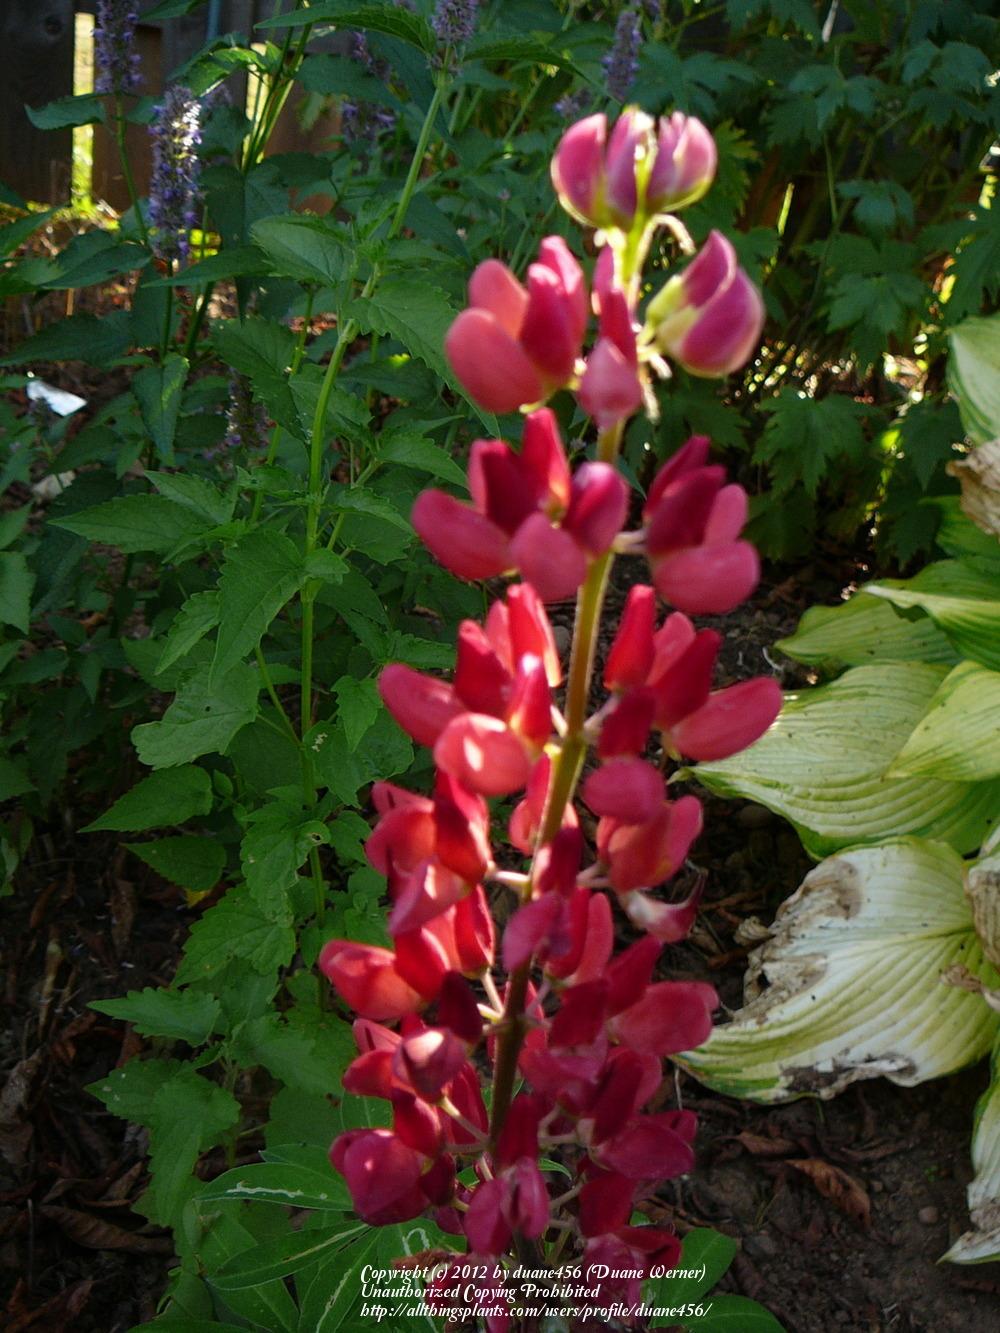 Photo of Lupine (Lupinus regalis 'Morello Cherry') uploaded by duane456